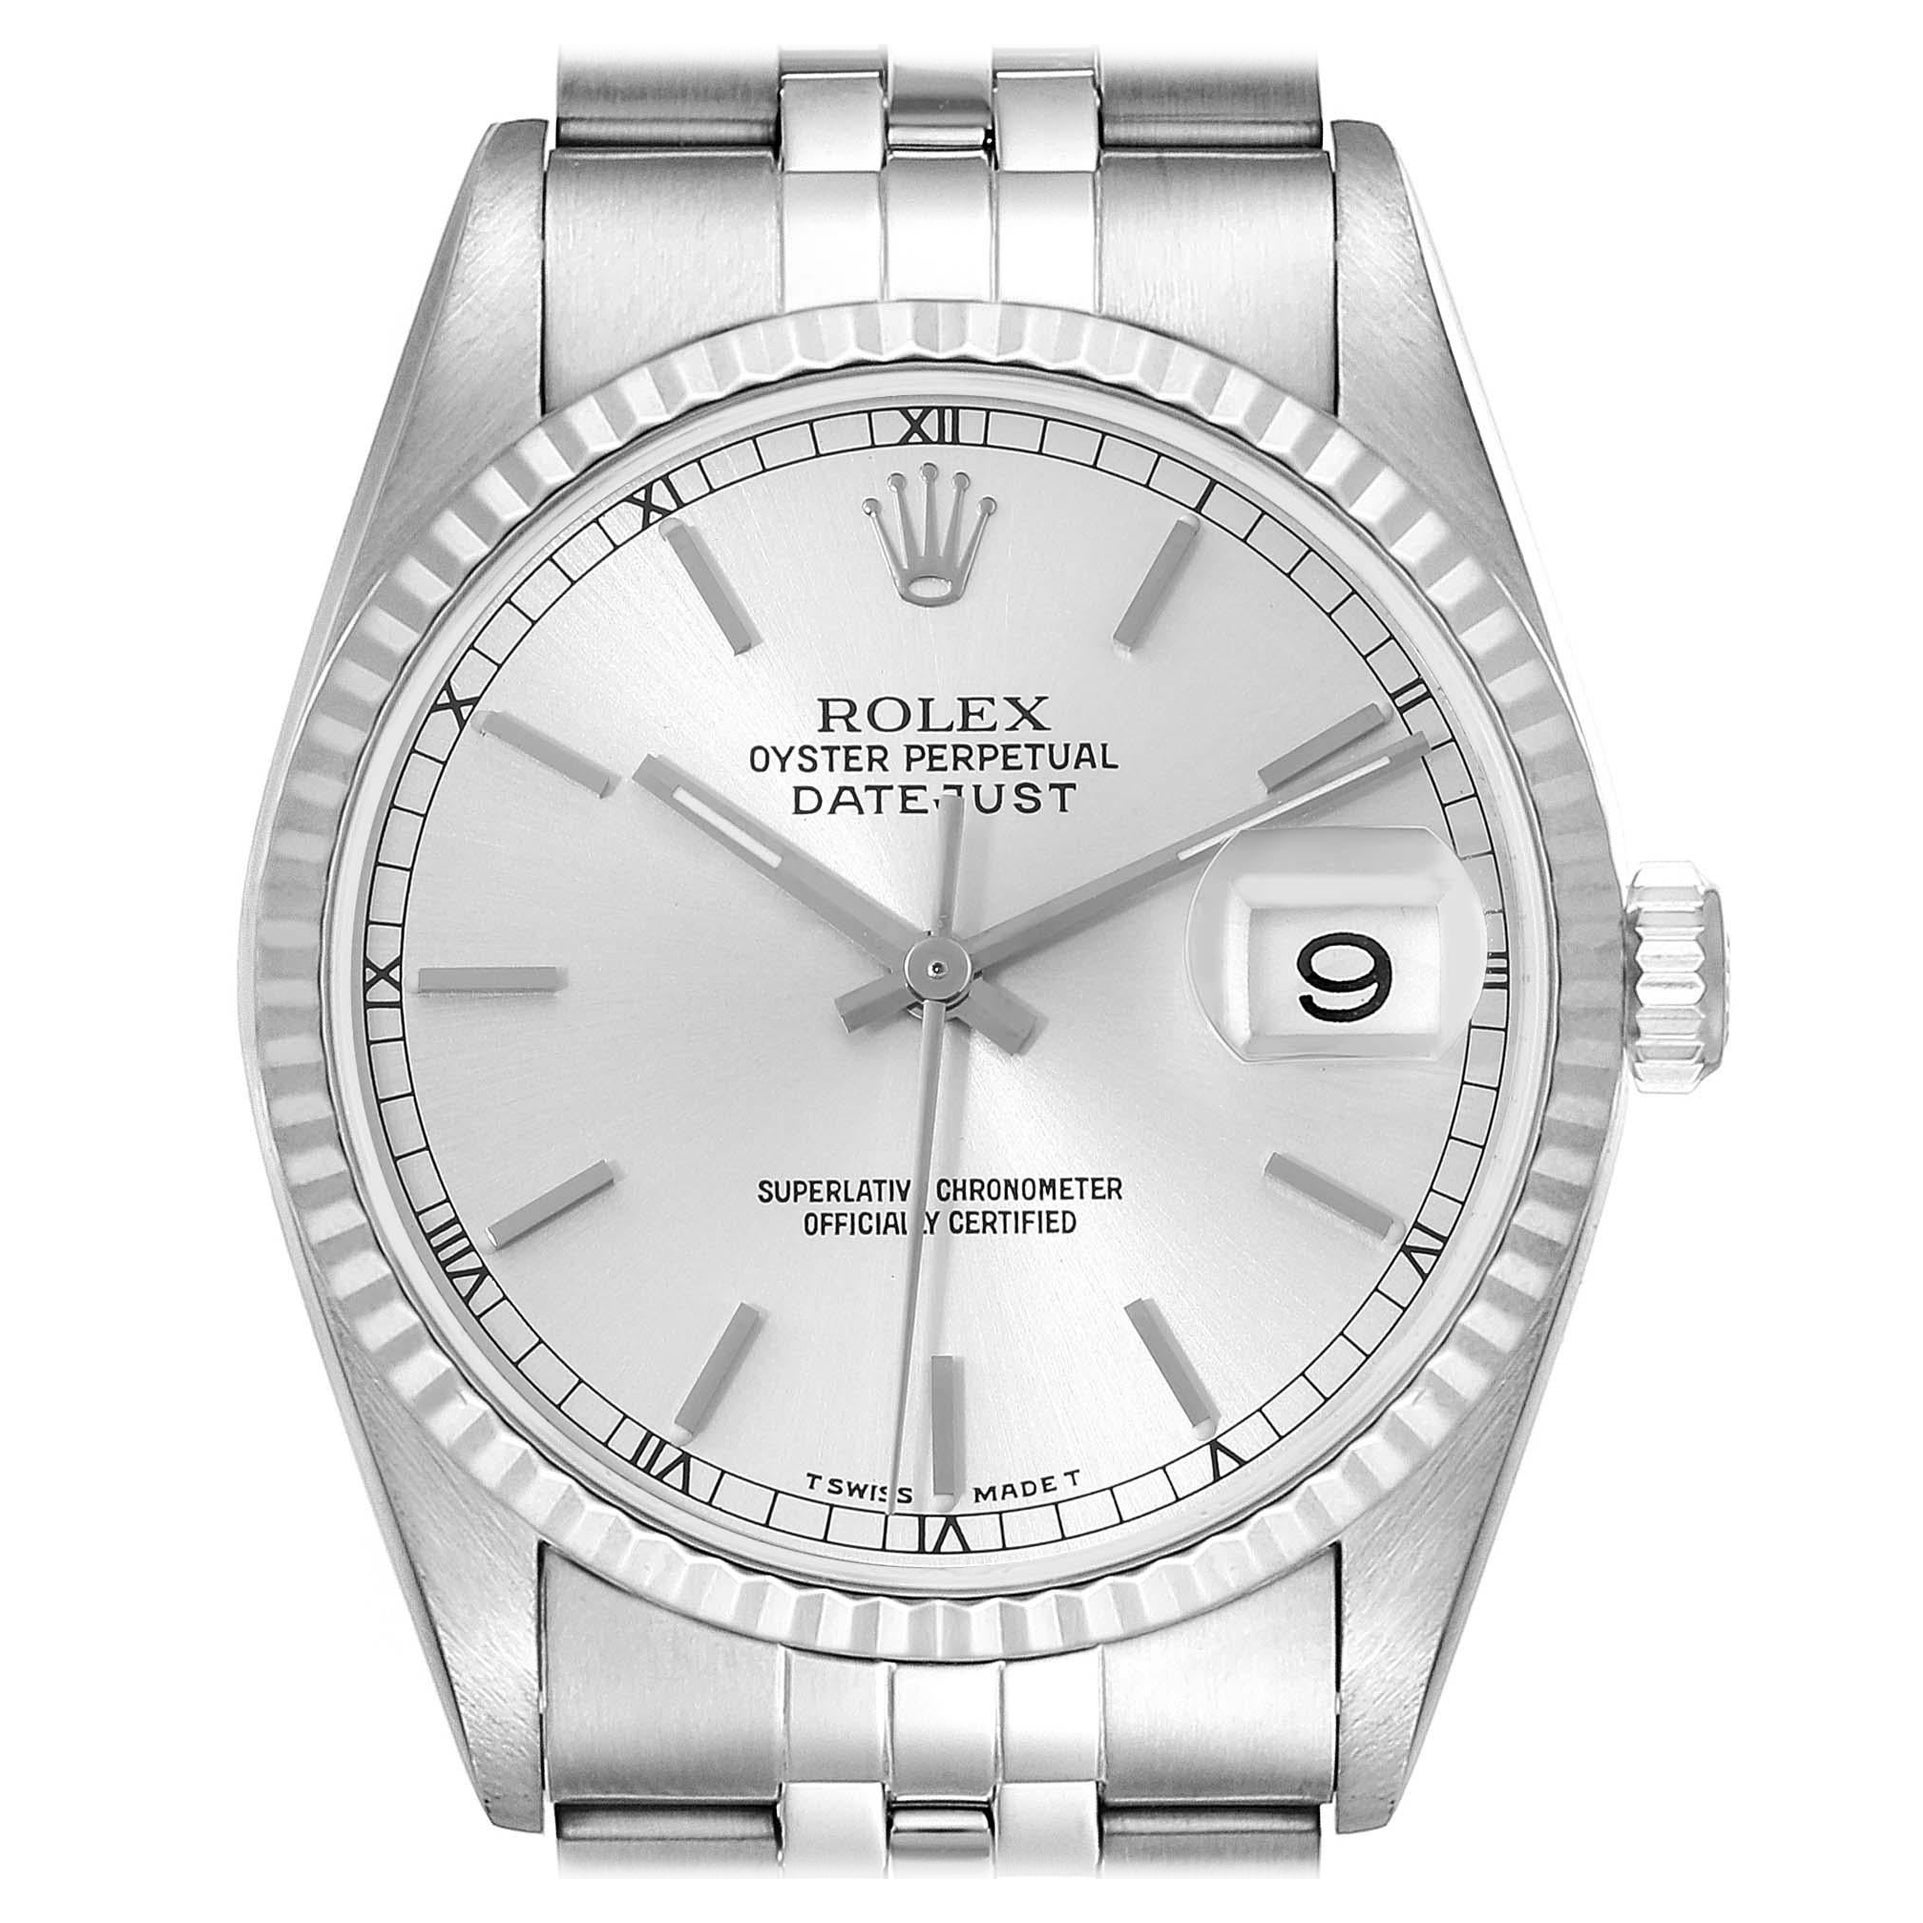 Rolex Datejust Silver Dial Steel White Gold Mens Watch 16234